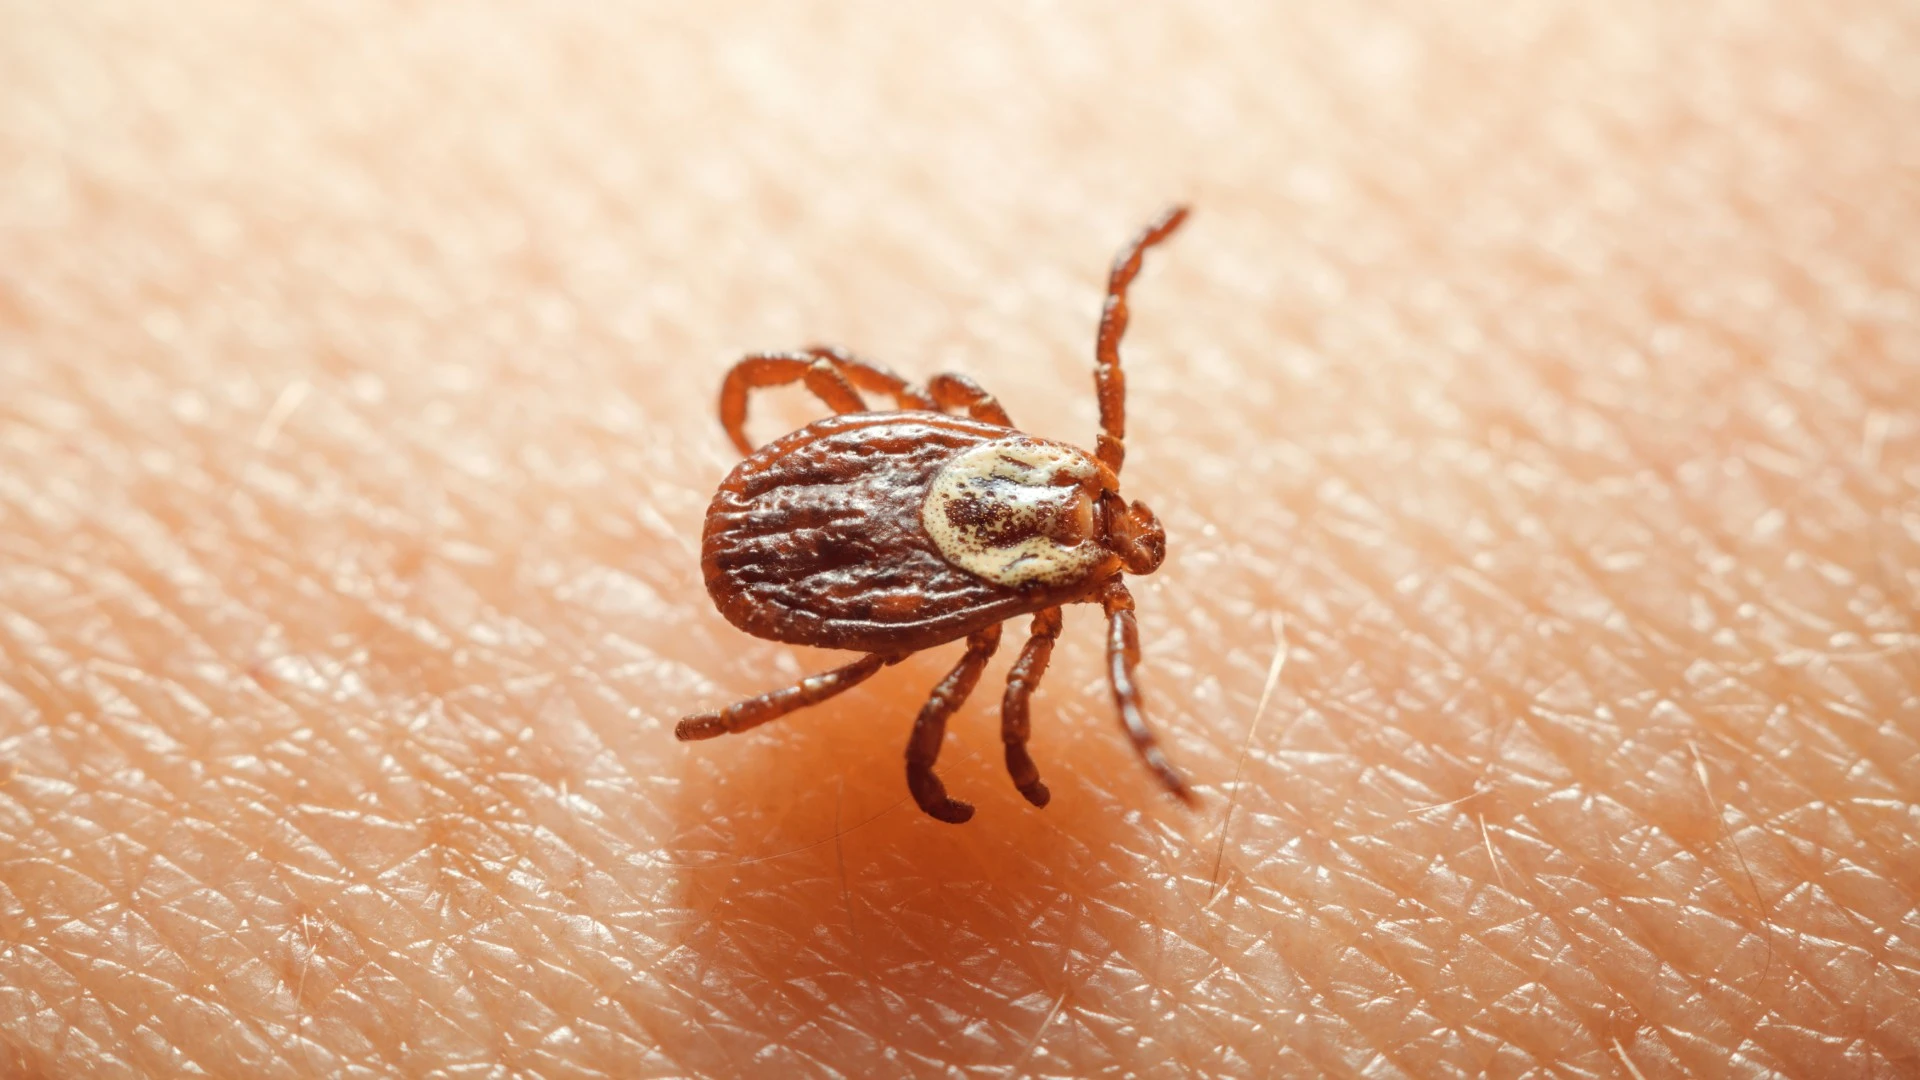 A tick from property on a homeowner's arm in Stilwell, KS.